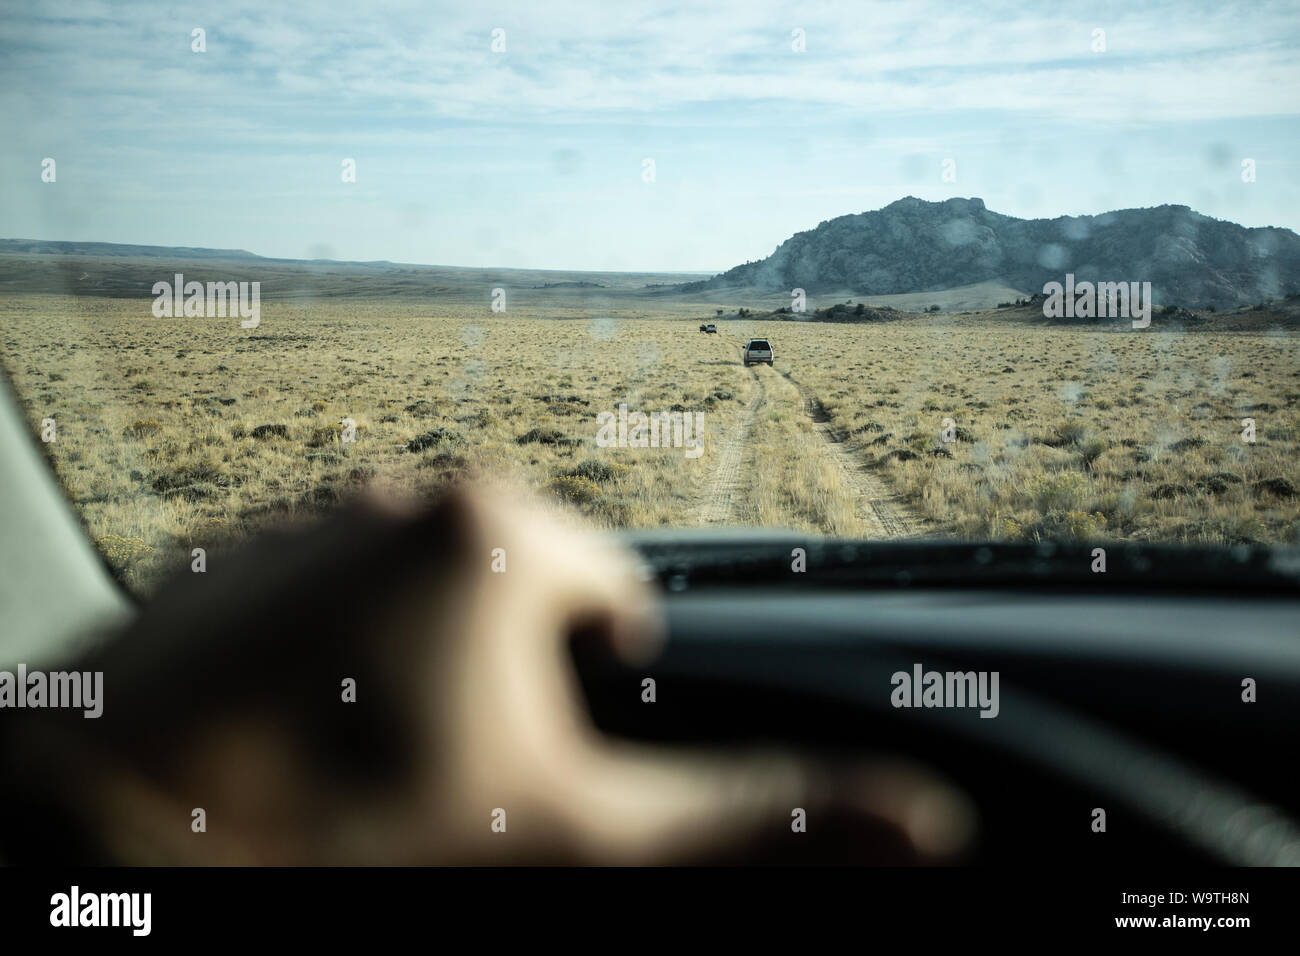 One person driving through a desert landscape, United States Stock Photo